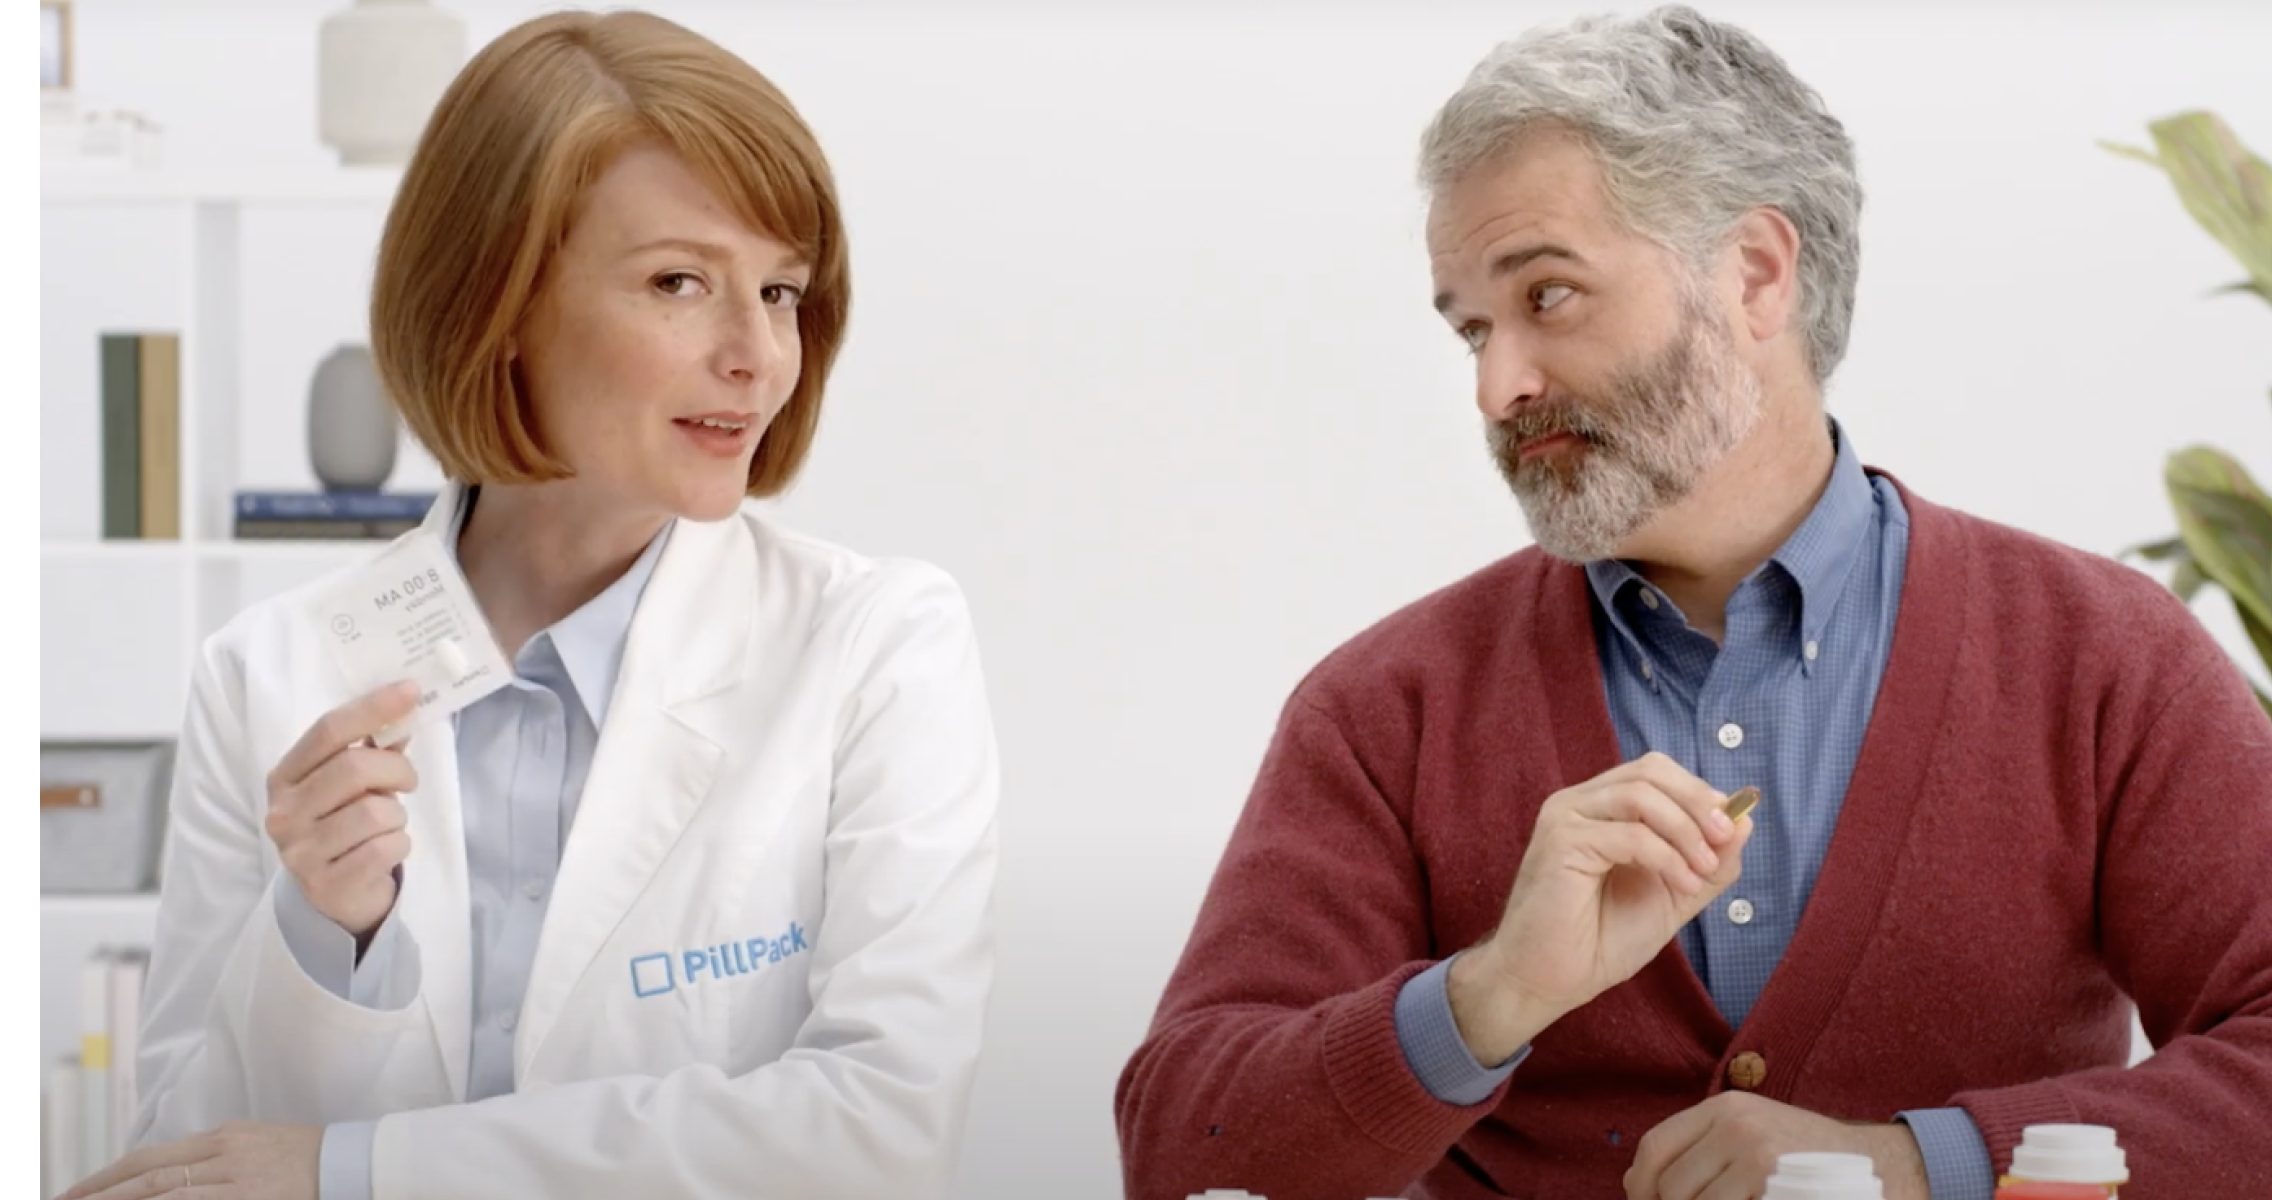 Doctor explains to patient how PillPack works to simplify prescriptions